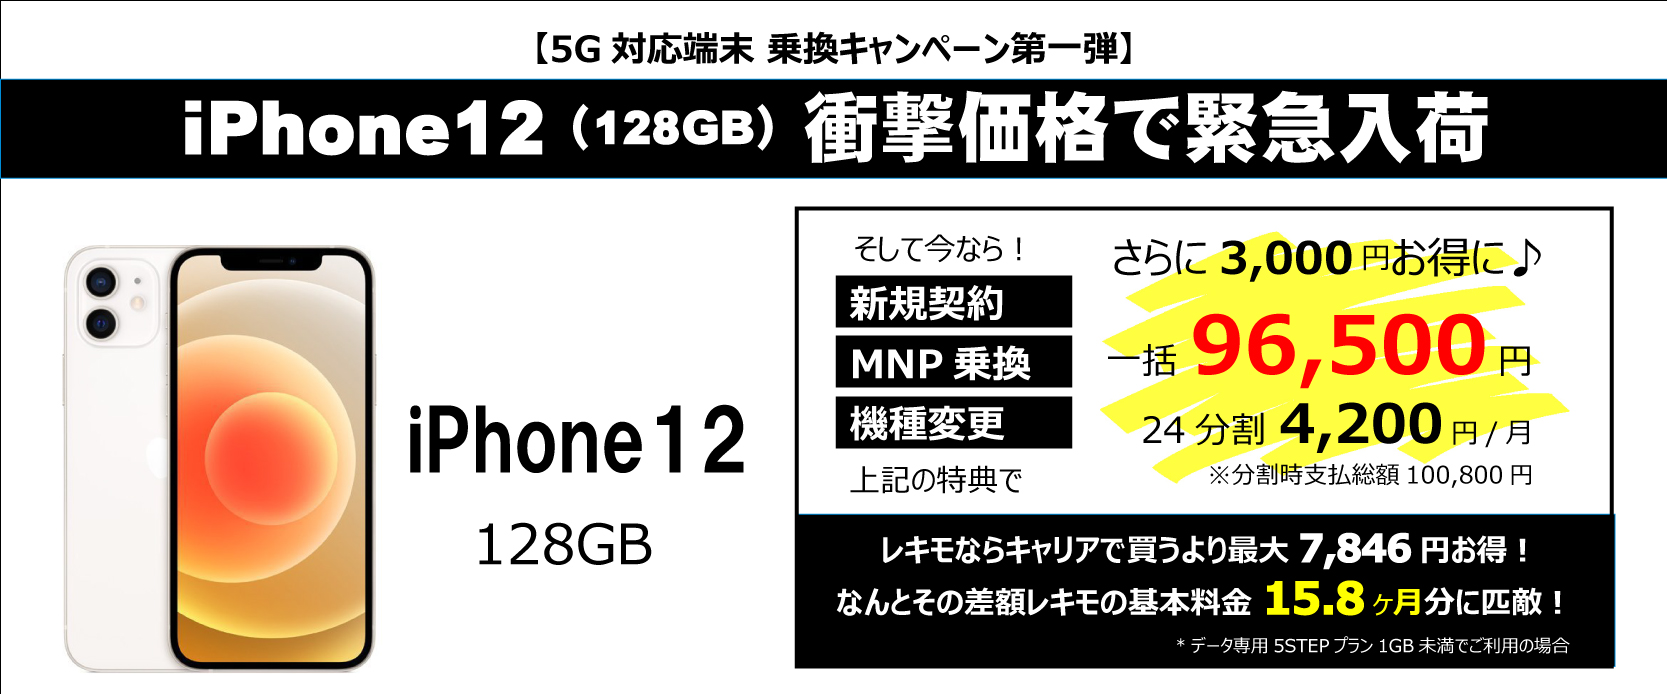 iphone取り扱い